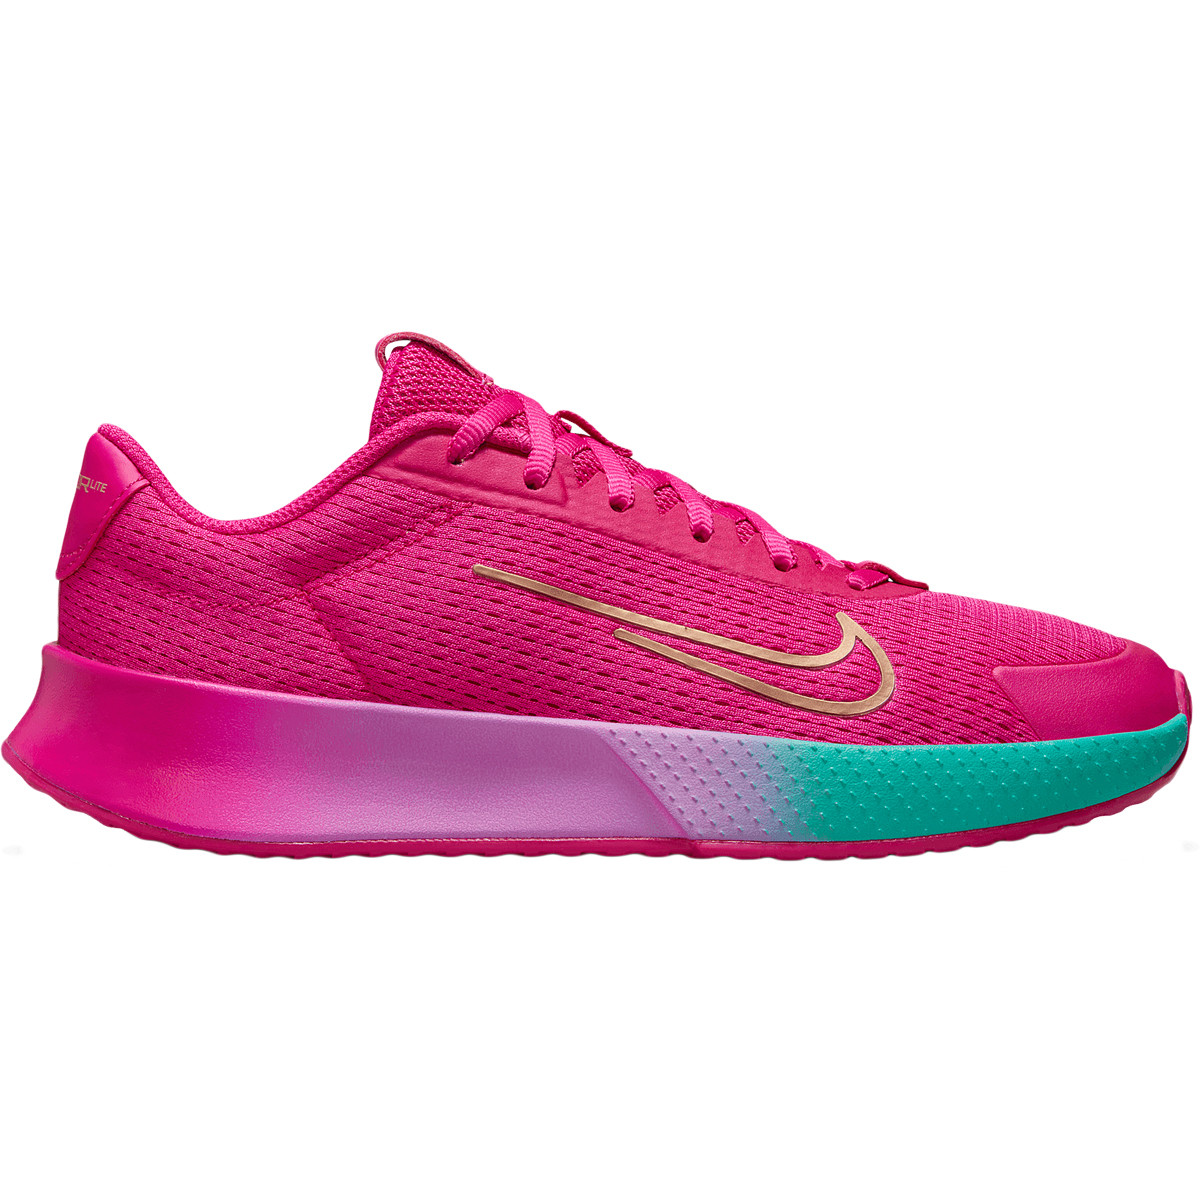 Chaussures Nike femme